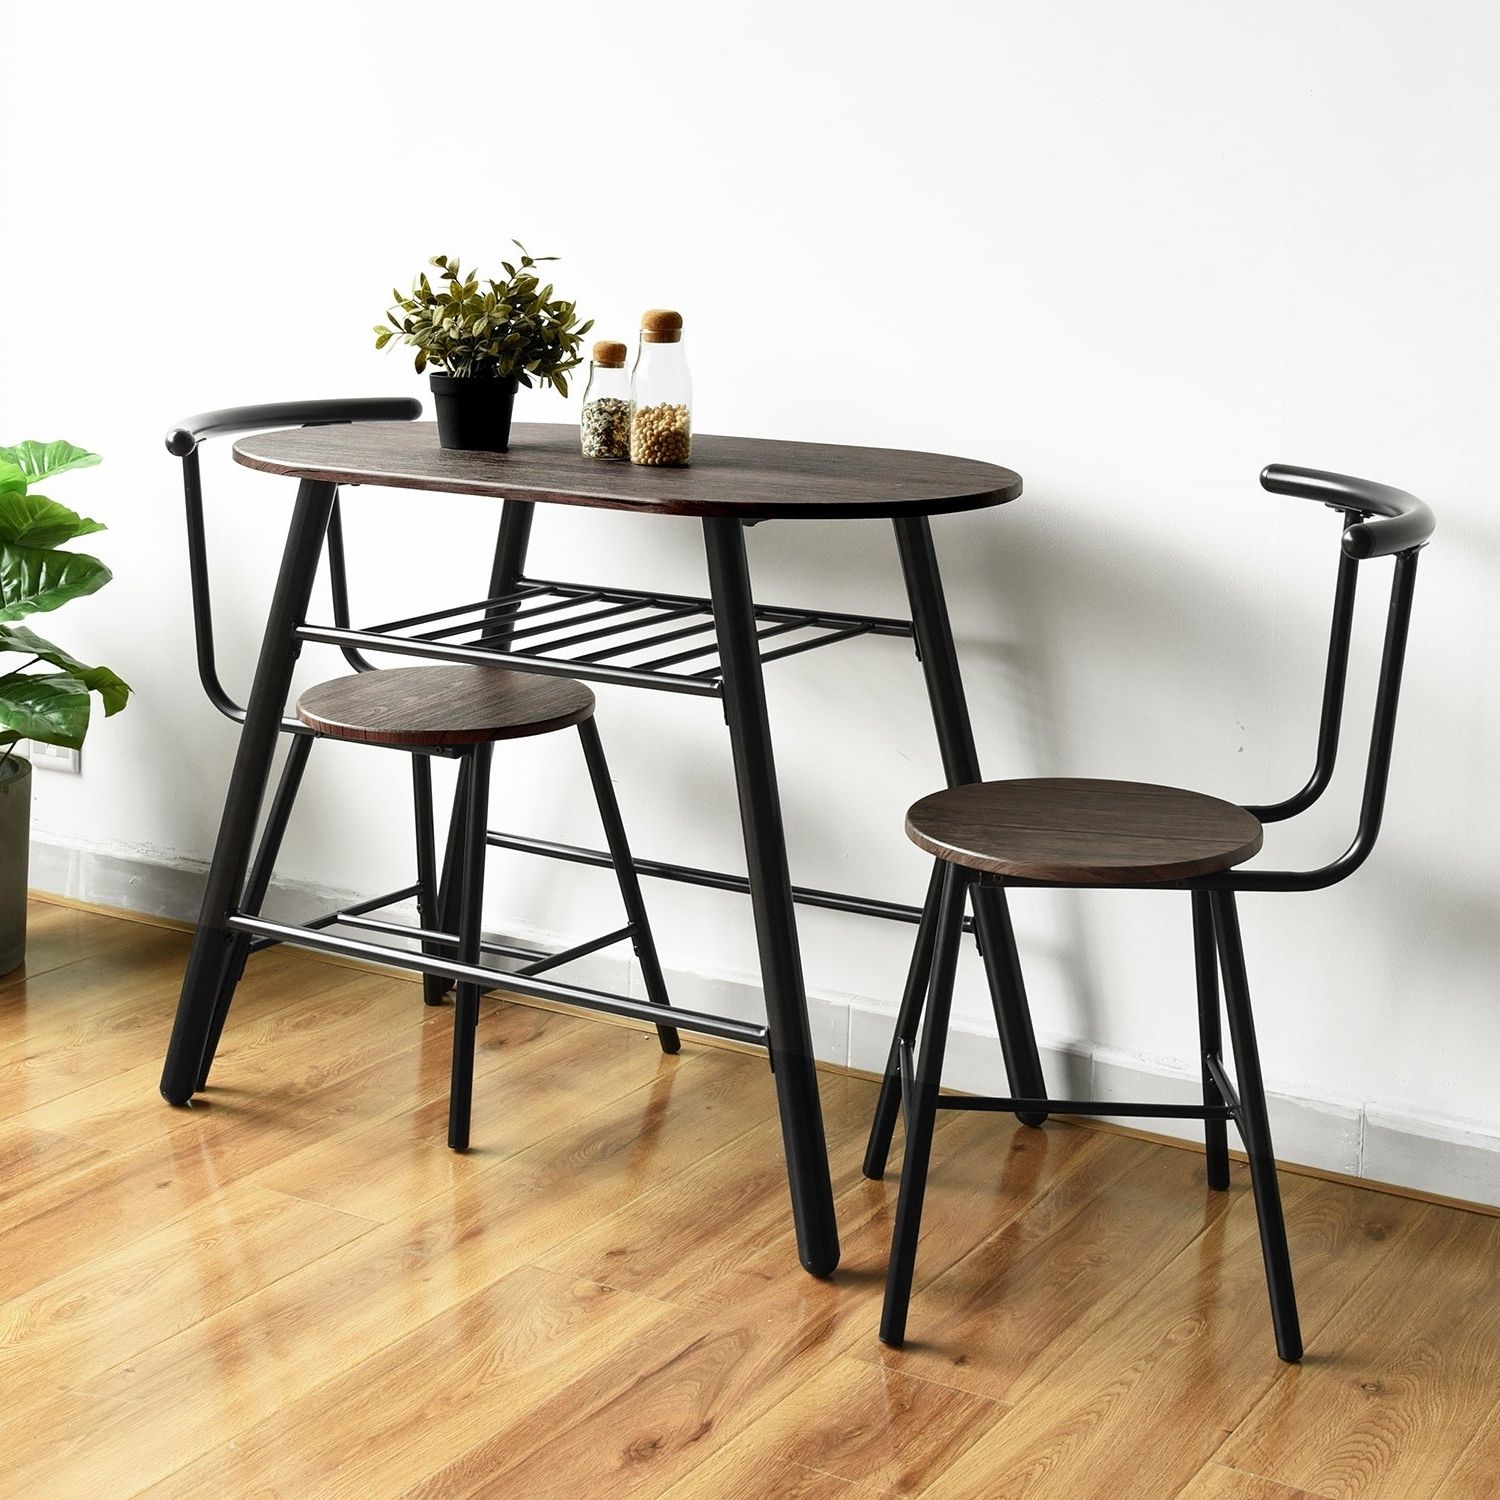 Carbon Loft Searz 3 Piece Dining Set Table And Chairs Inside Current 3 Piece Dining Sets (View 17 of 20)